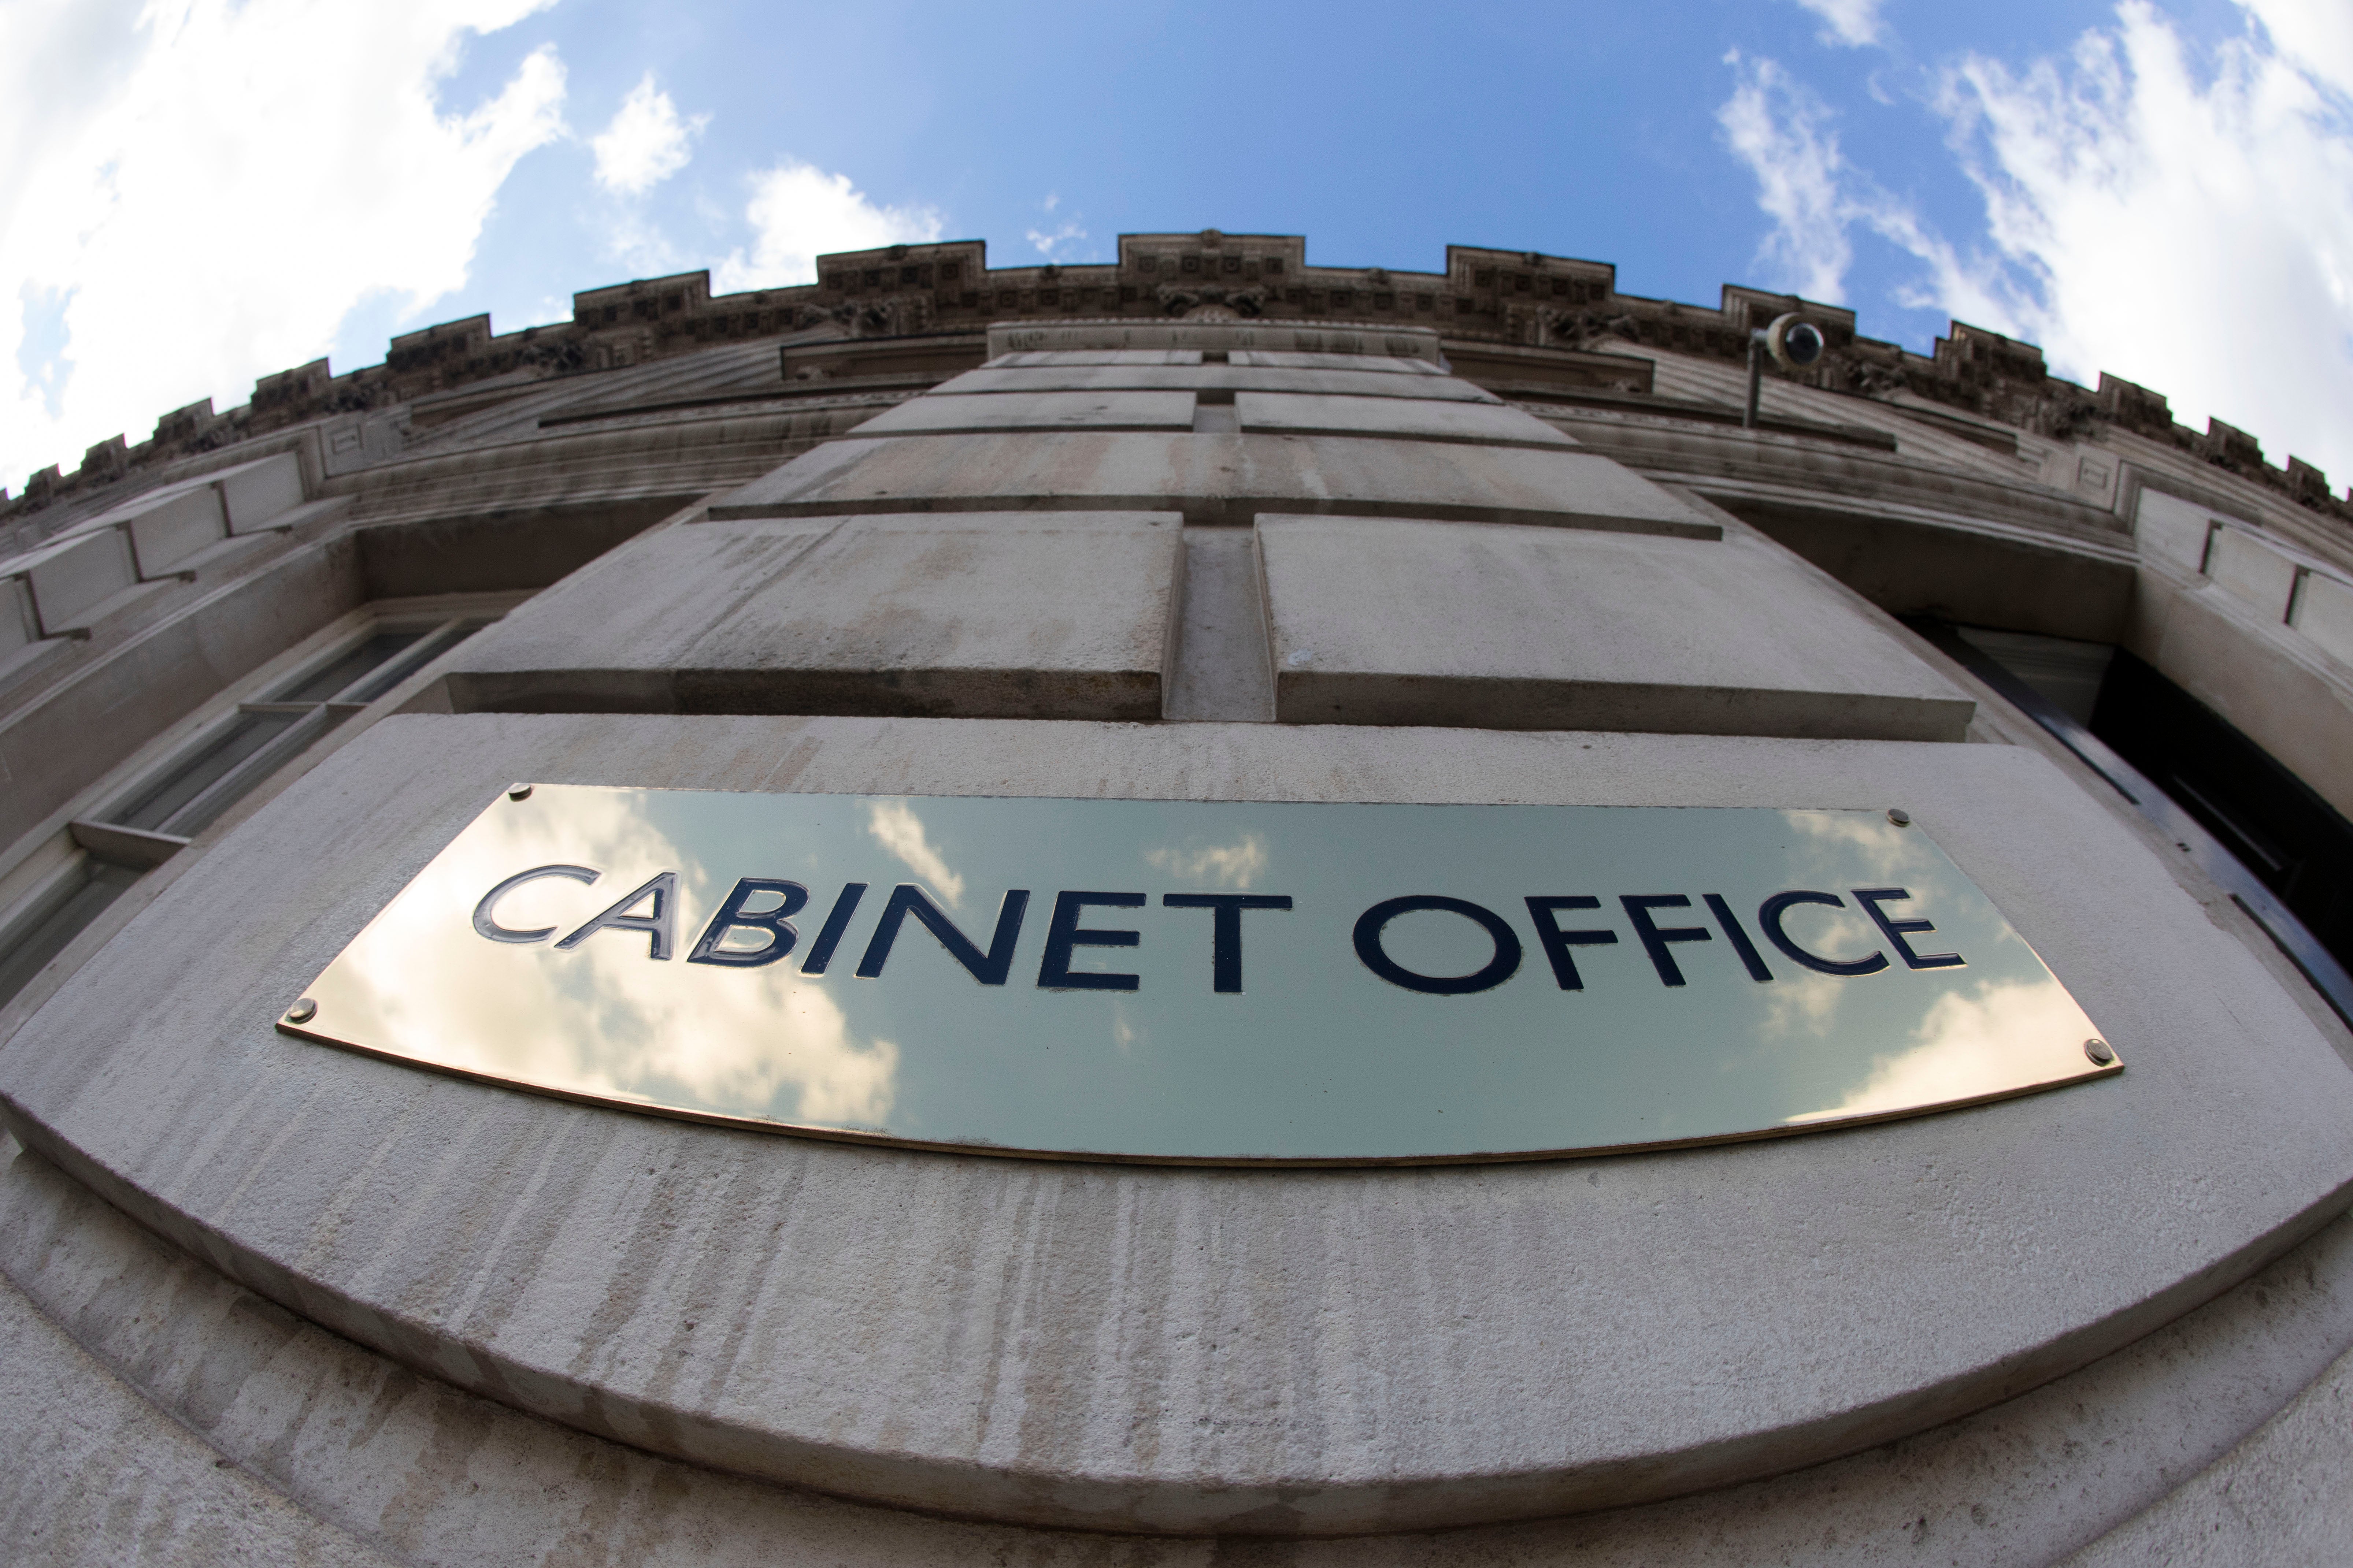 Parties were allegedly held outside the Cabinet Office